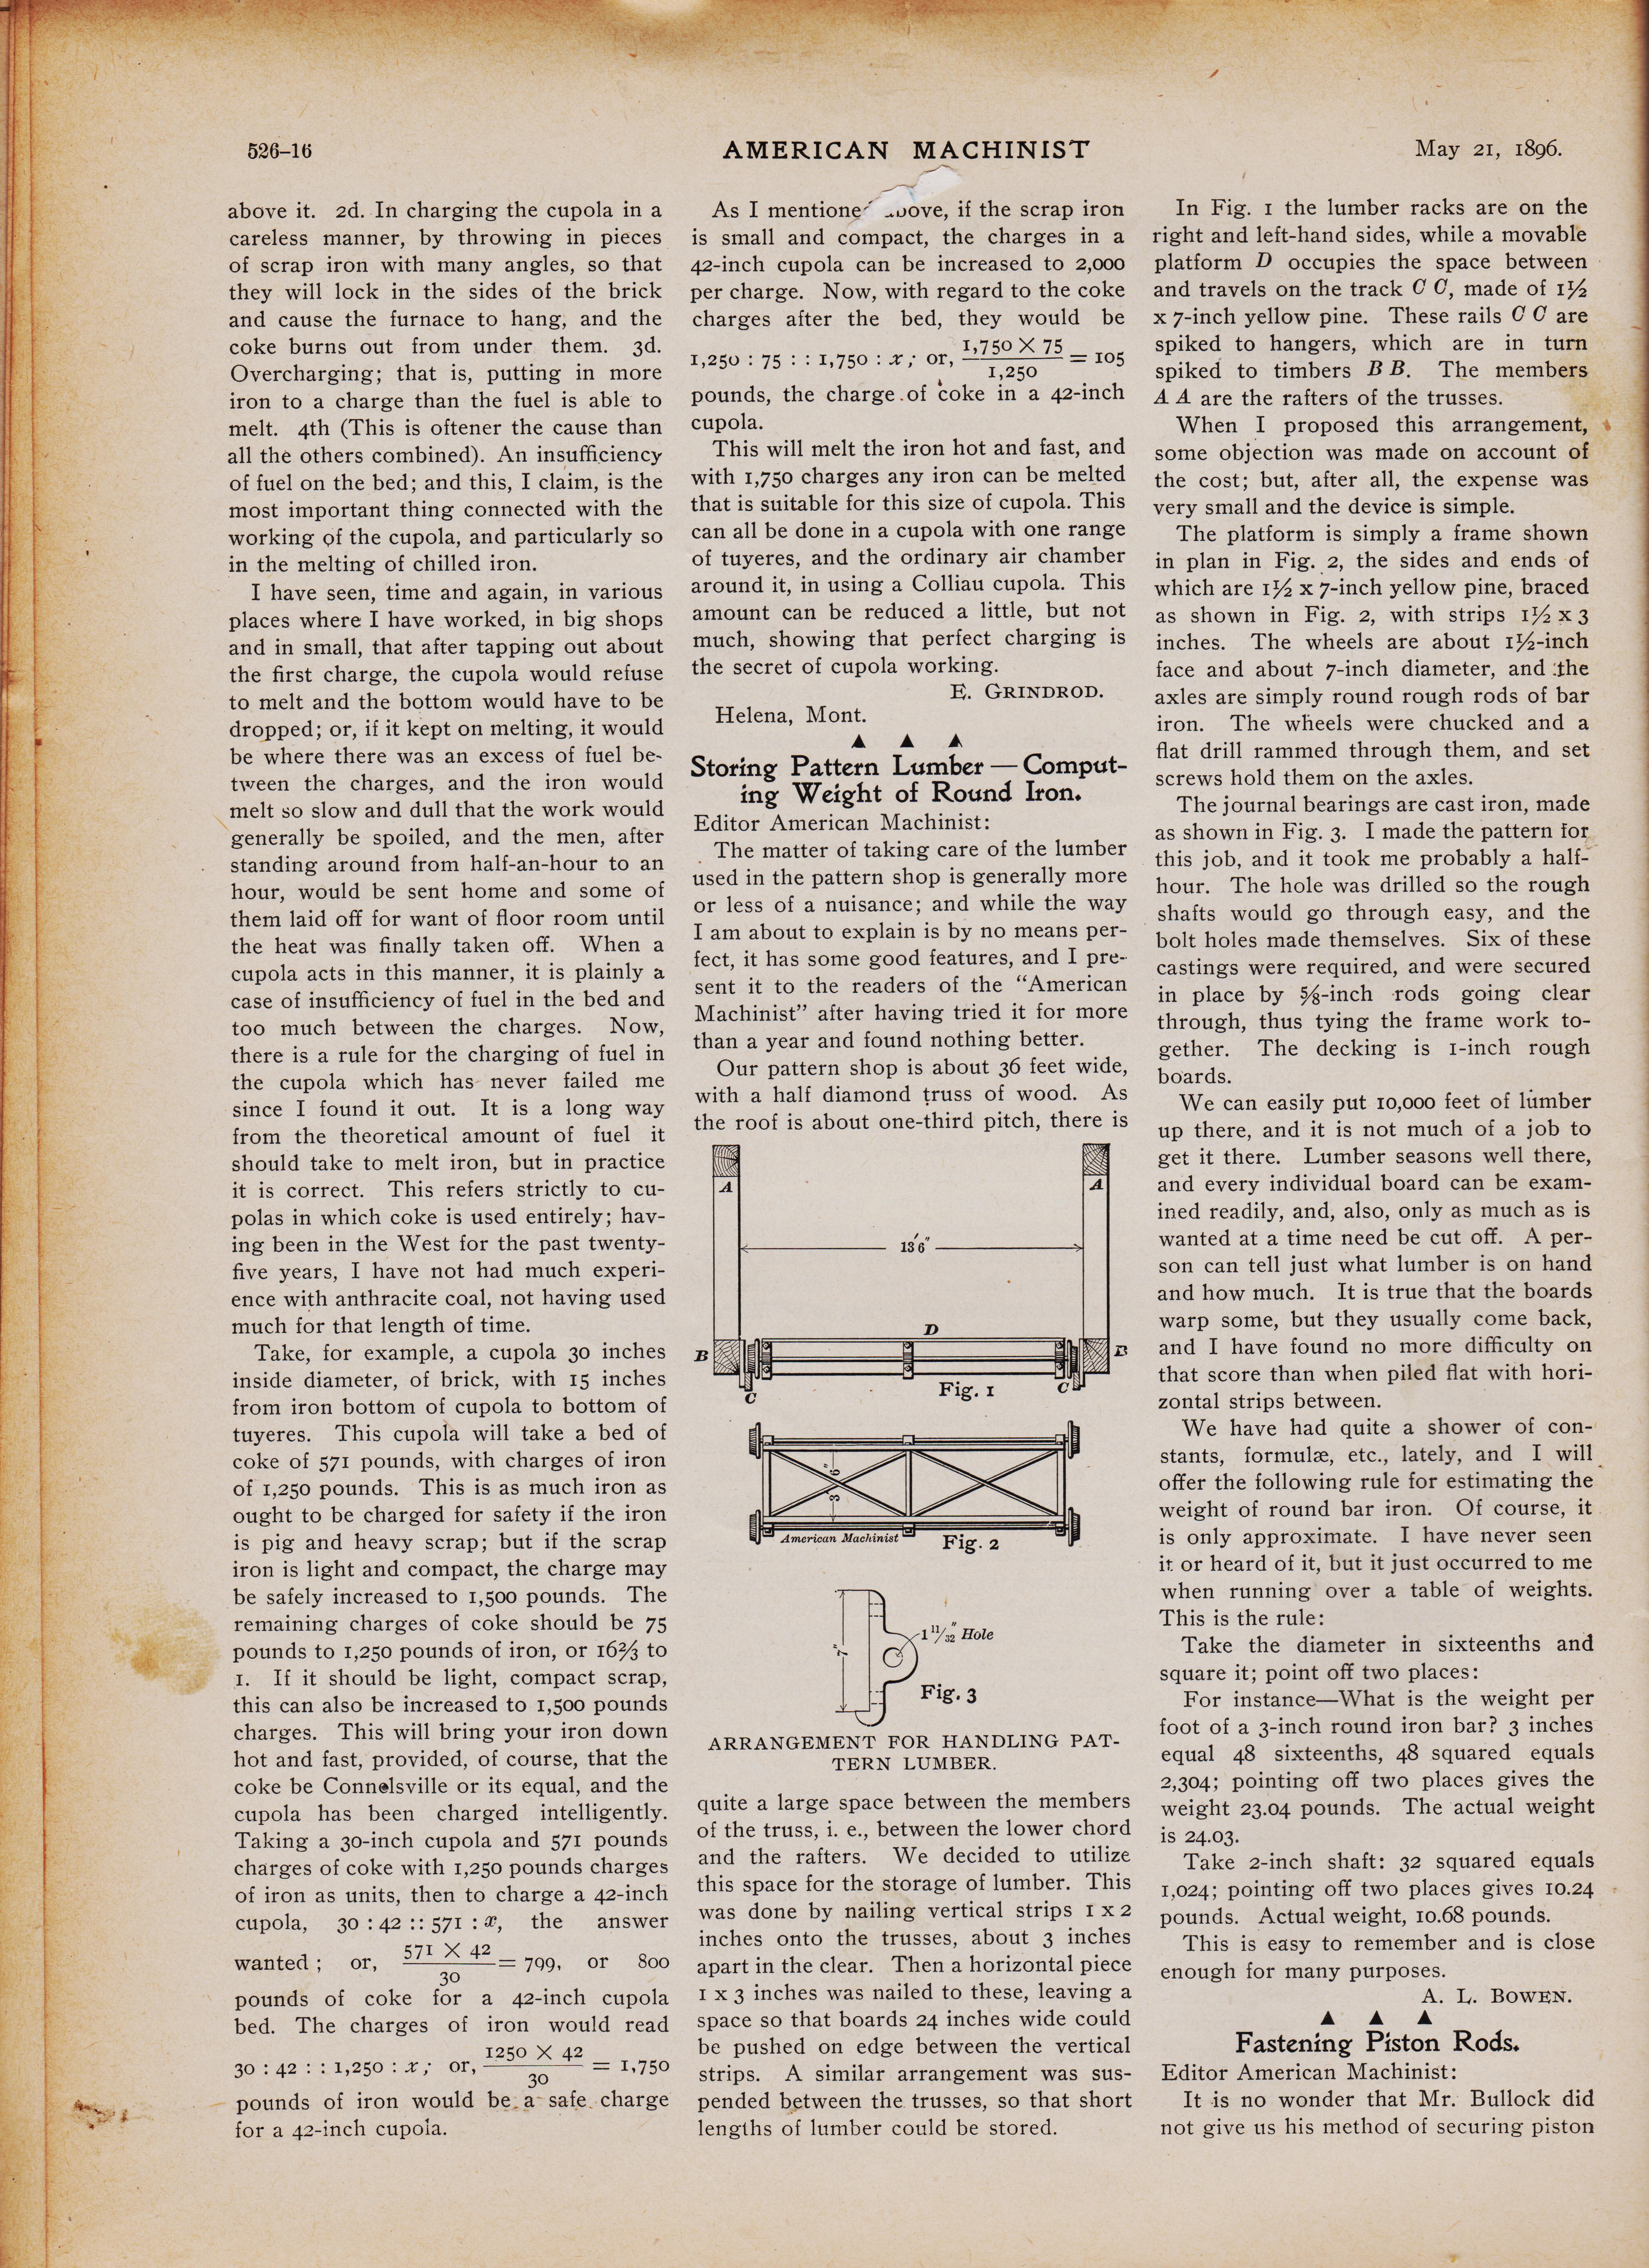 https://antiquemachinery.com/images-1896/American-Machinist-Feb-12-1887-May-1-pg-16-charging-a-Cupalo-Furnace-Storing-pattern-lumber.jpeg